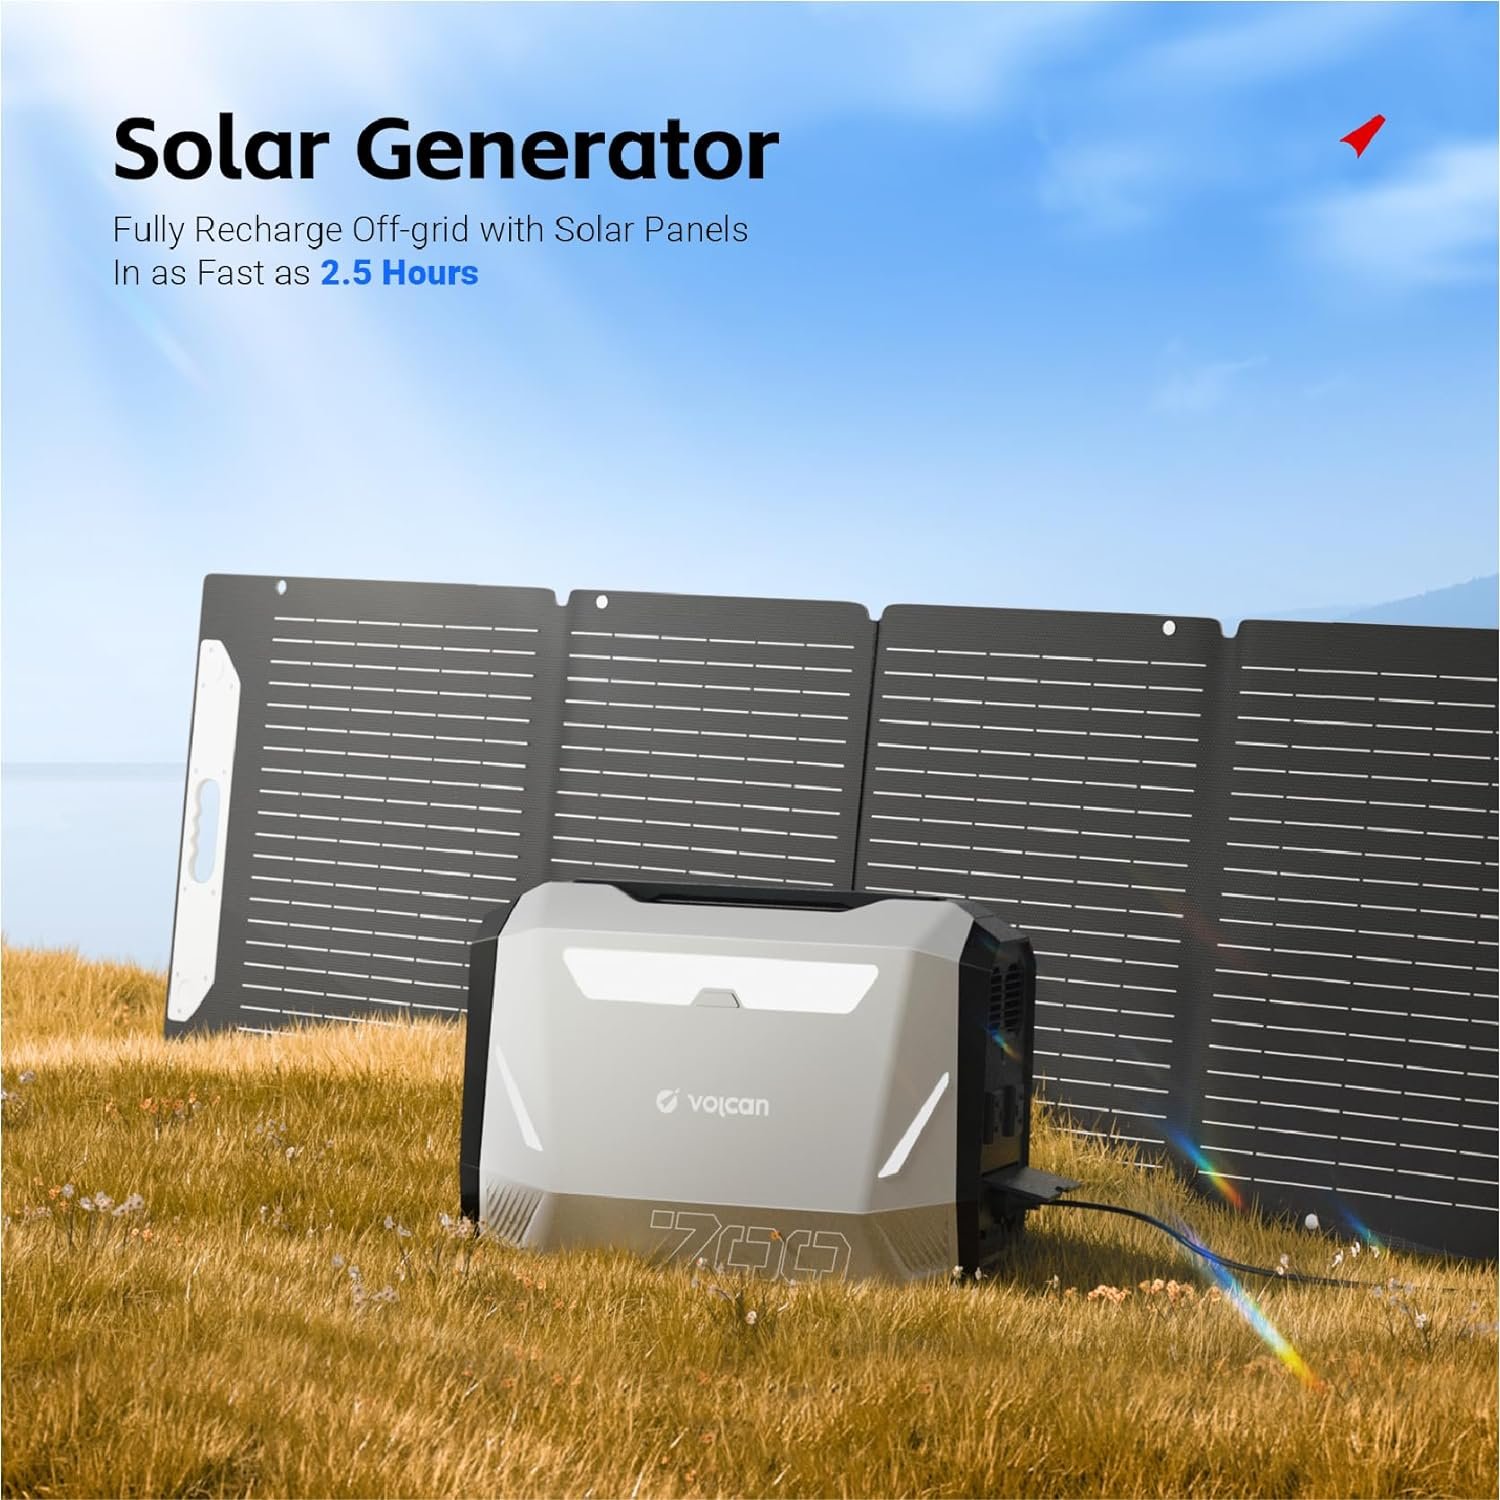 Volcan Portable Solar Panel 120W 20.9V Review